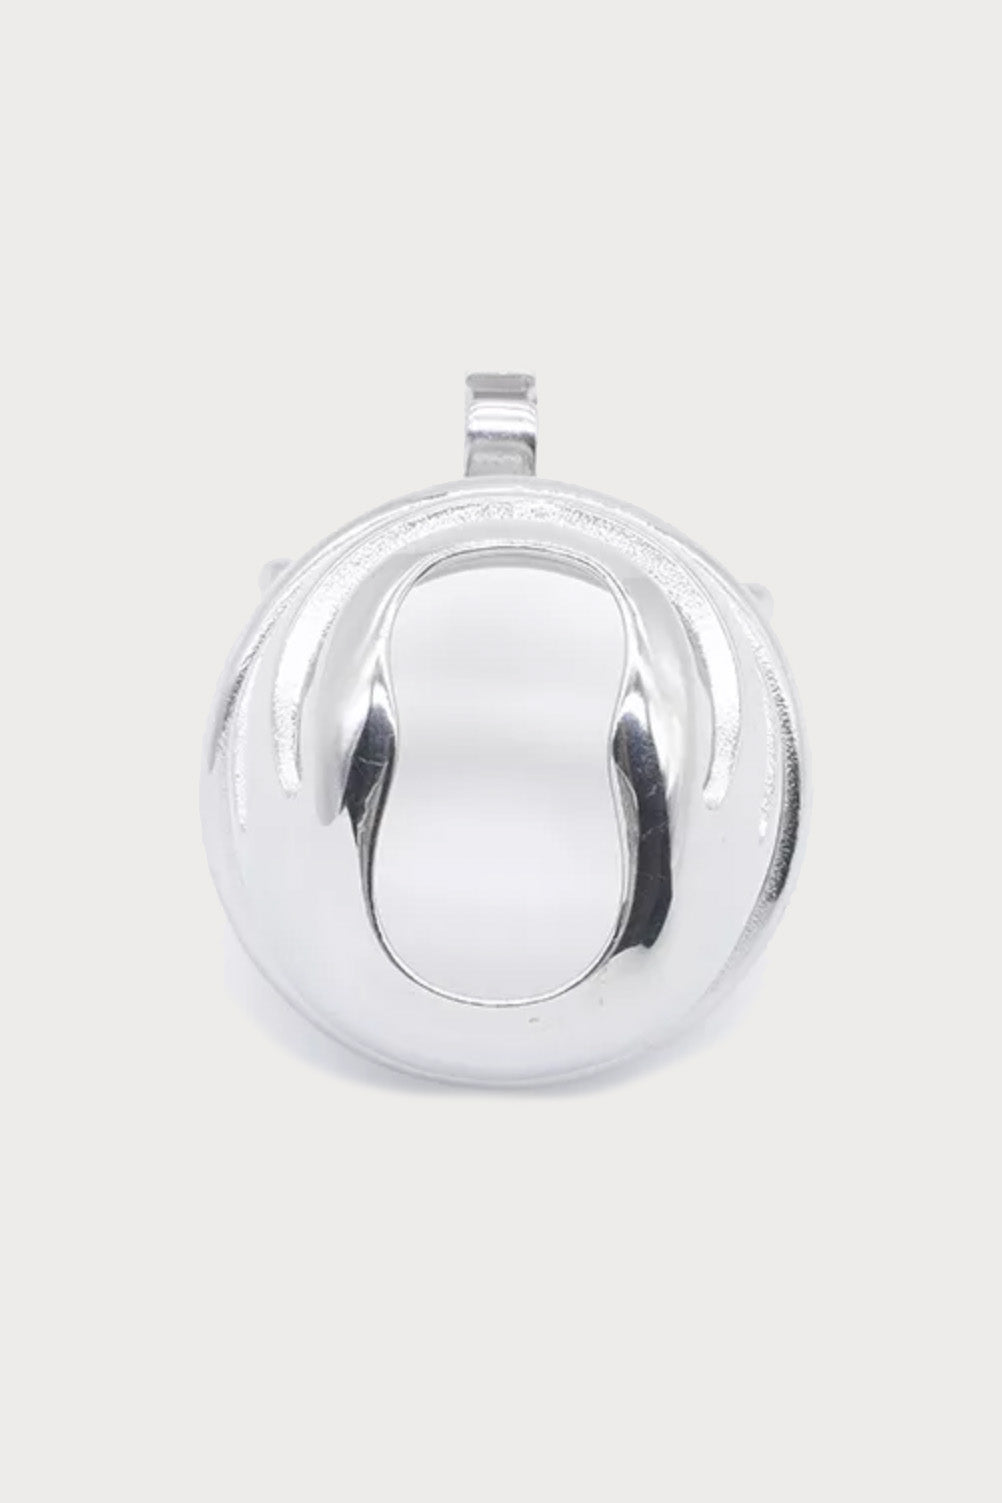 The Prisoner | Steel Chastity Cage | Chastity Cages Co